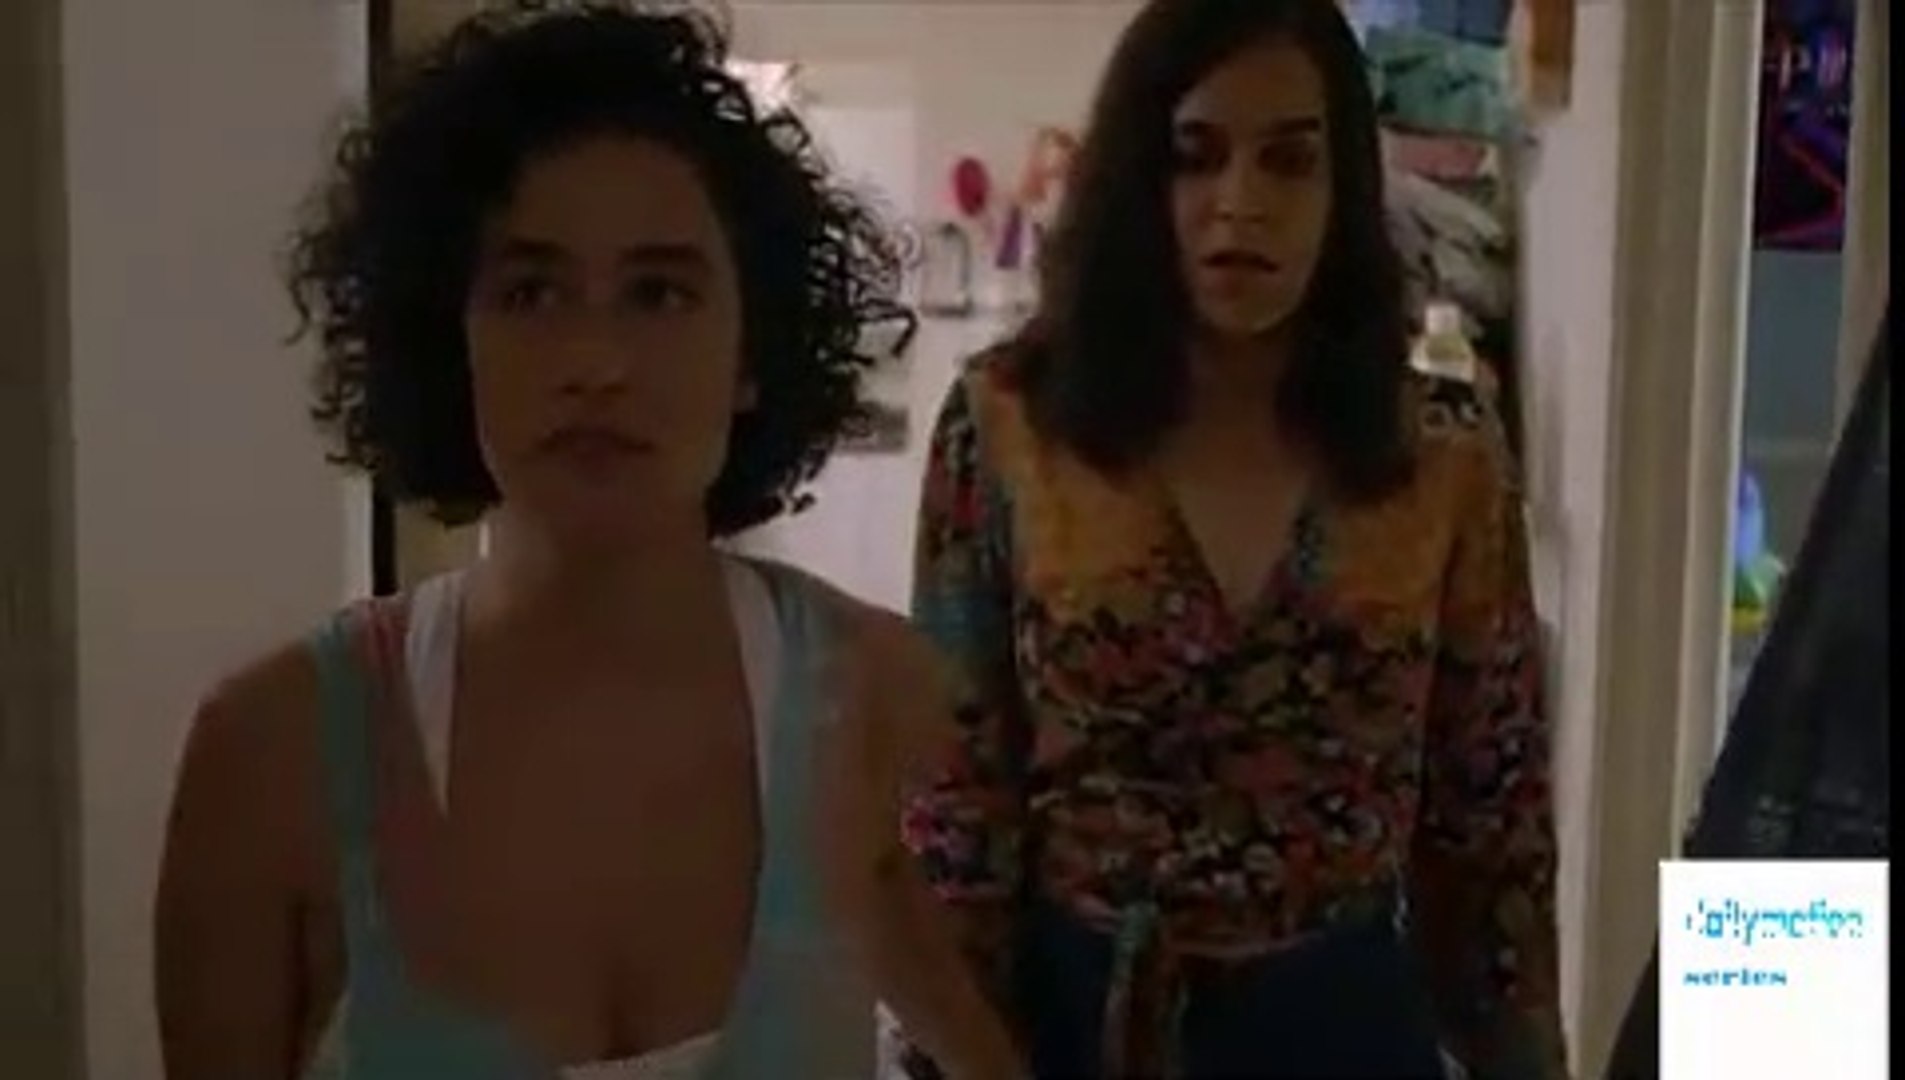 Uncensored broad city can we